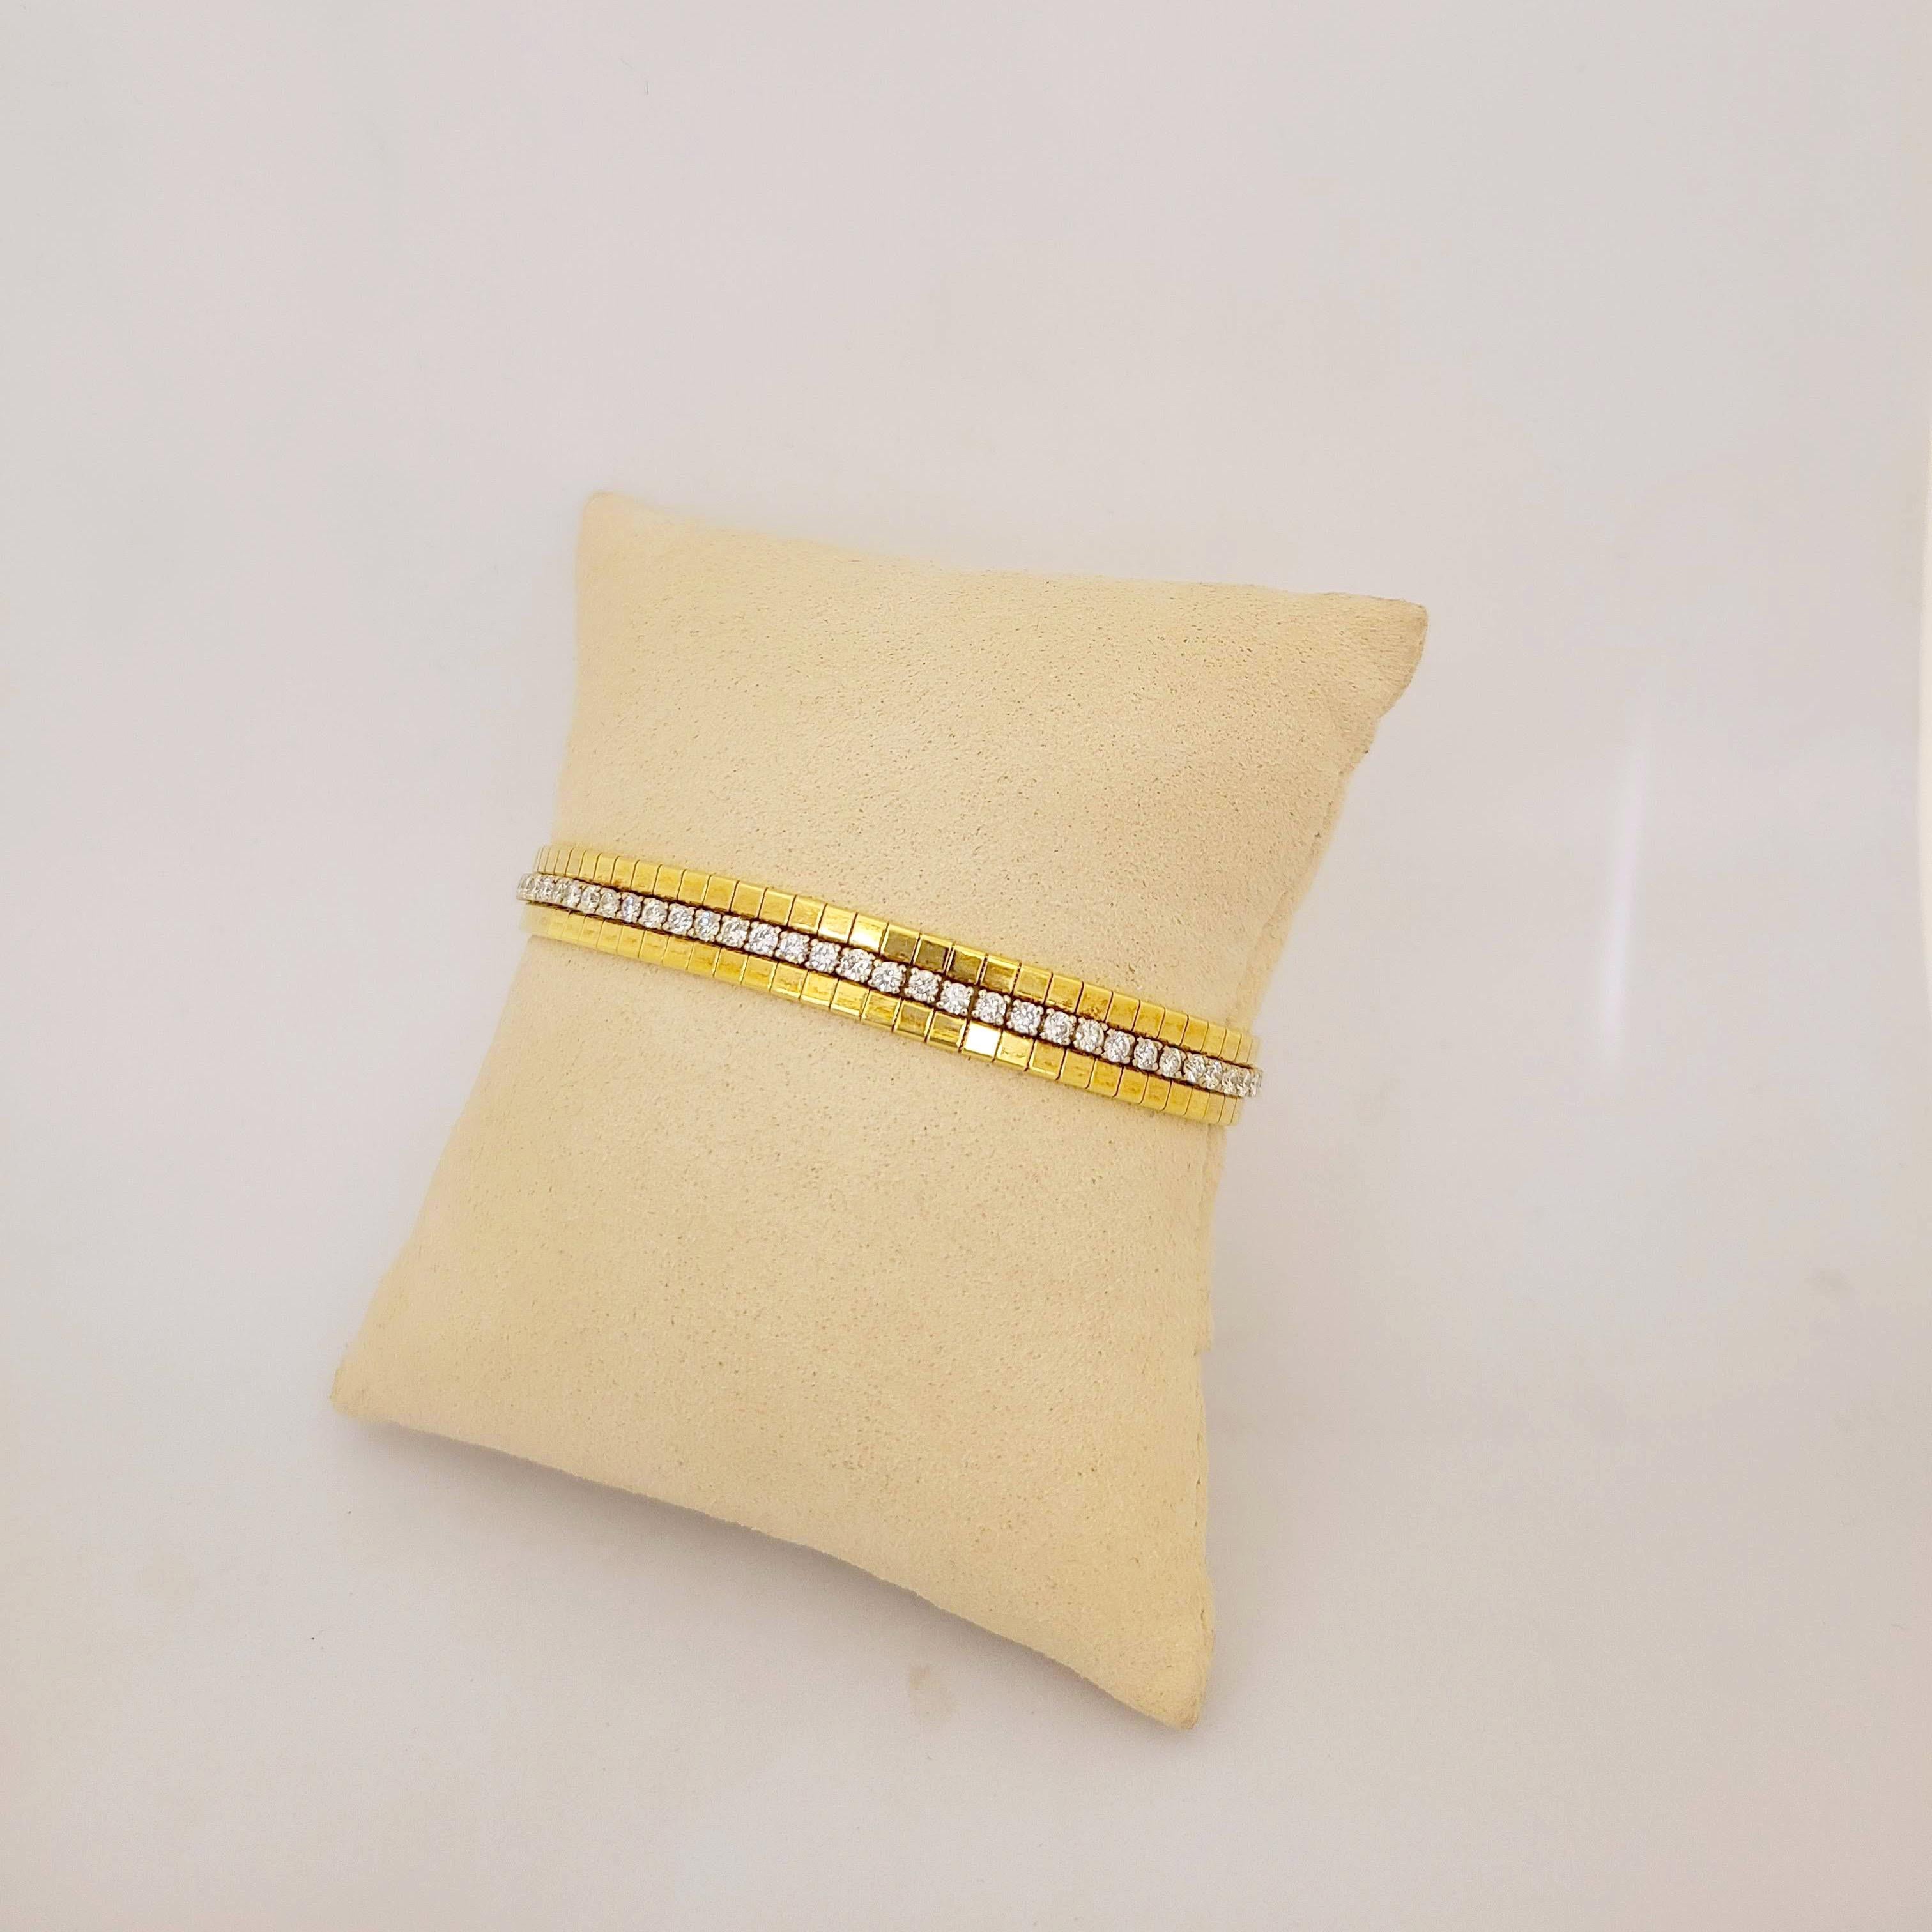 18 karat gold bracelet. This bracelet is set with a single row of round Brilliant Diamonds in 4 prong white gold settings, down the center. The outer 2 rows are made up of yellow gold square sections.
The bracelet measures 7